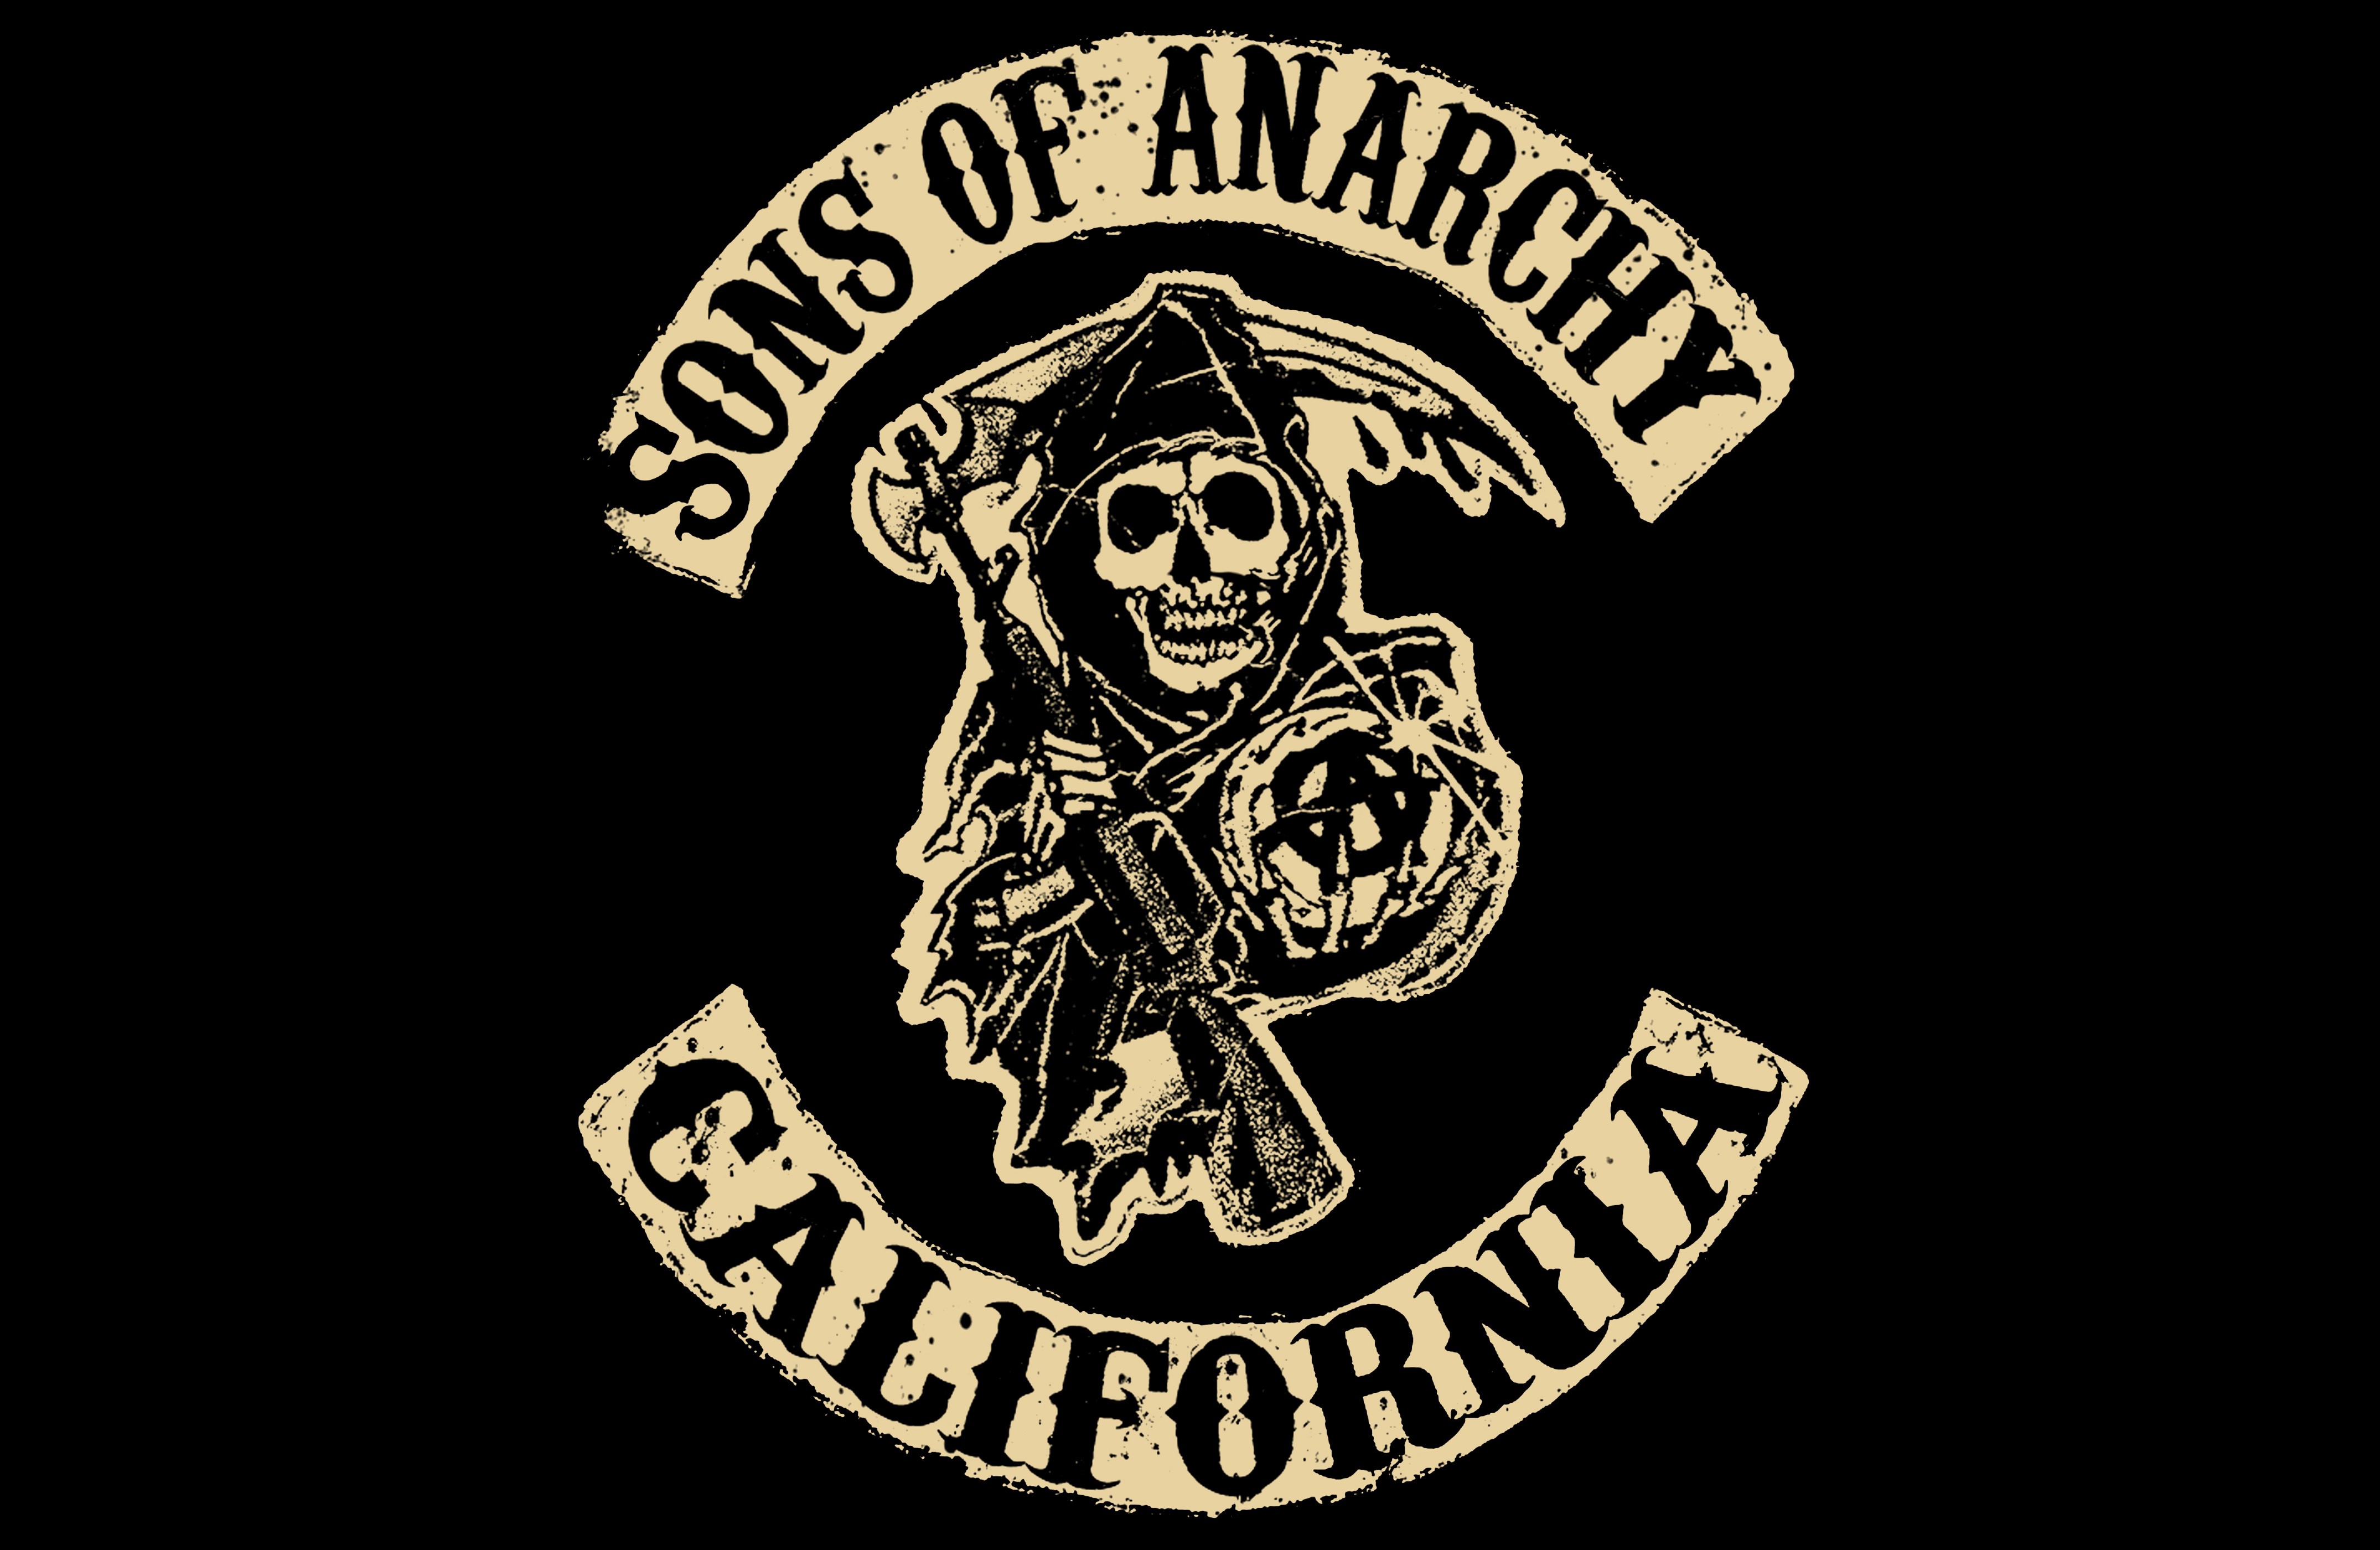 sons of anarchy, tv show